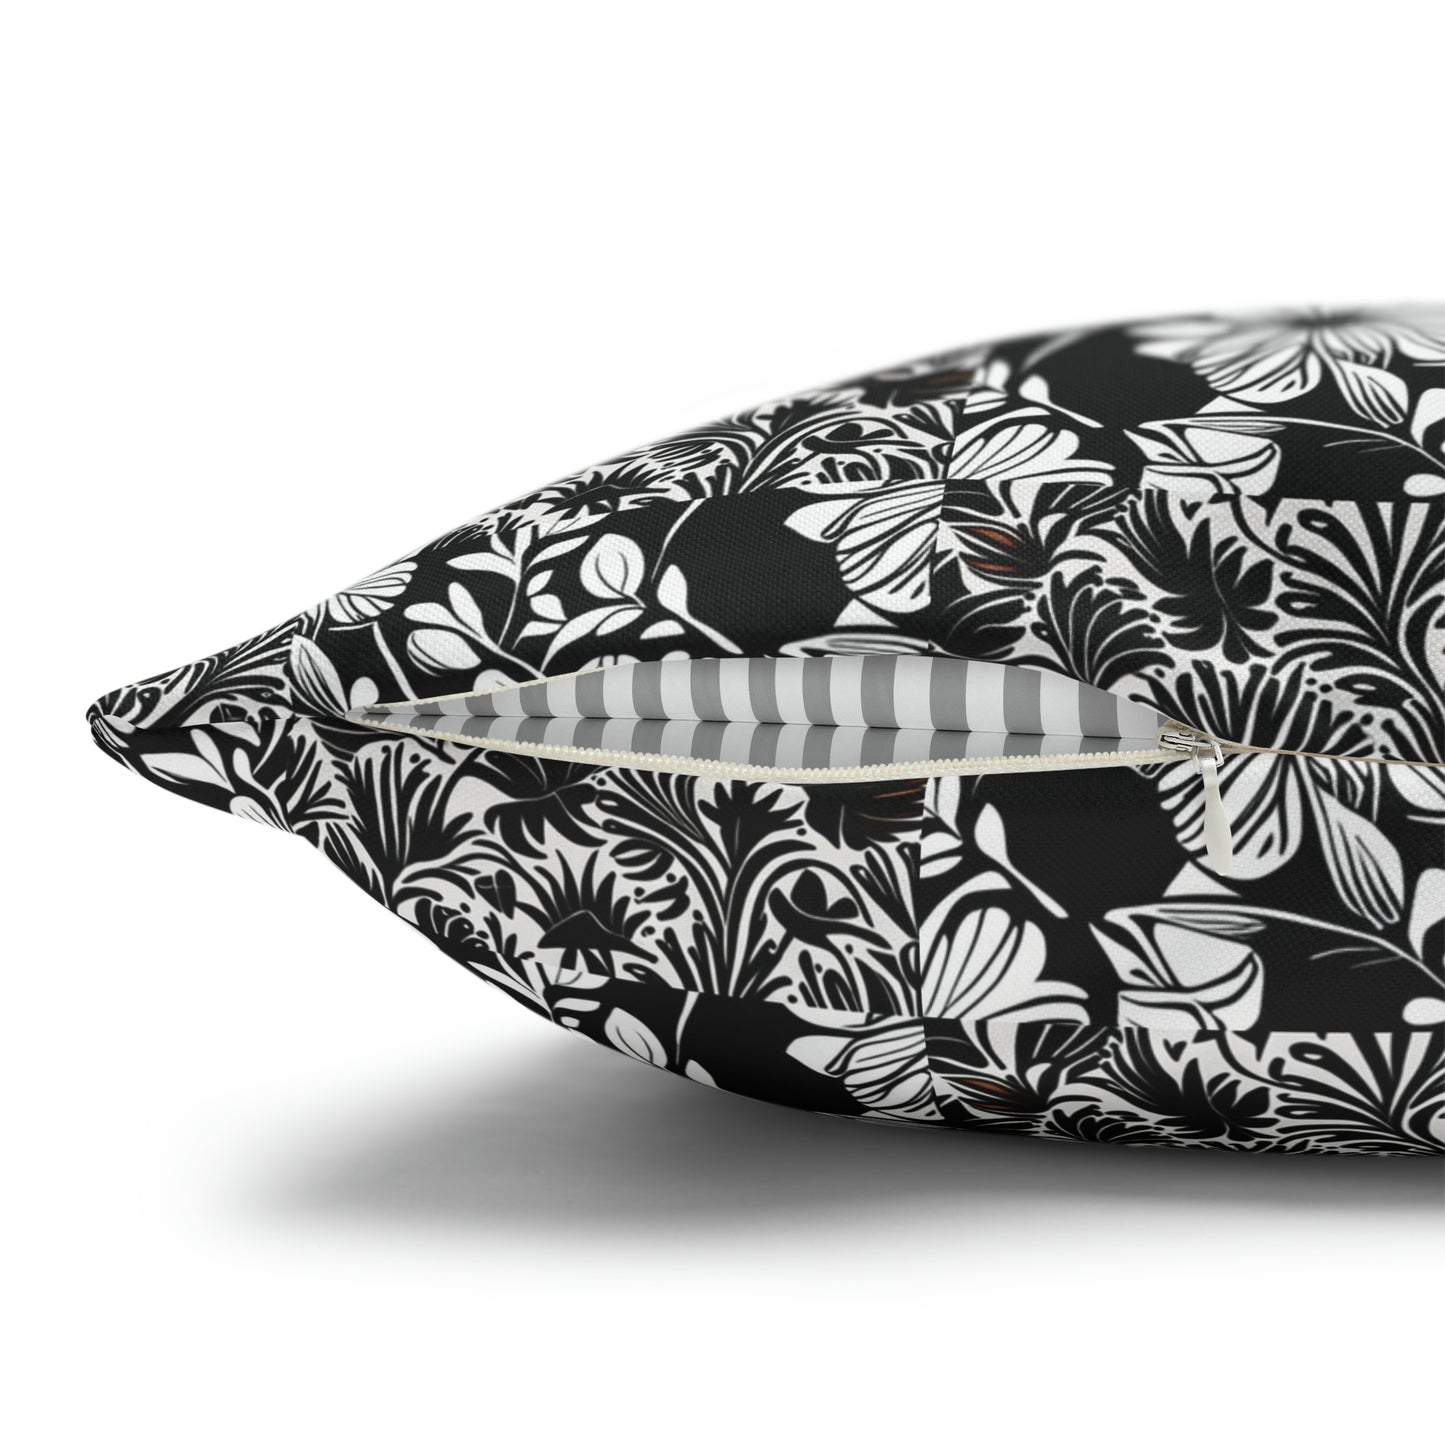 Black and White Floral Collage Pattern Decorative Spun Polyester Pillow Cover